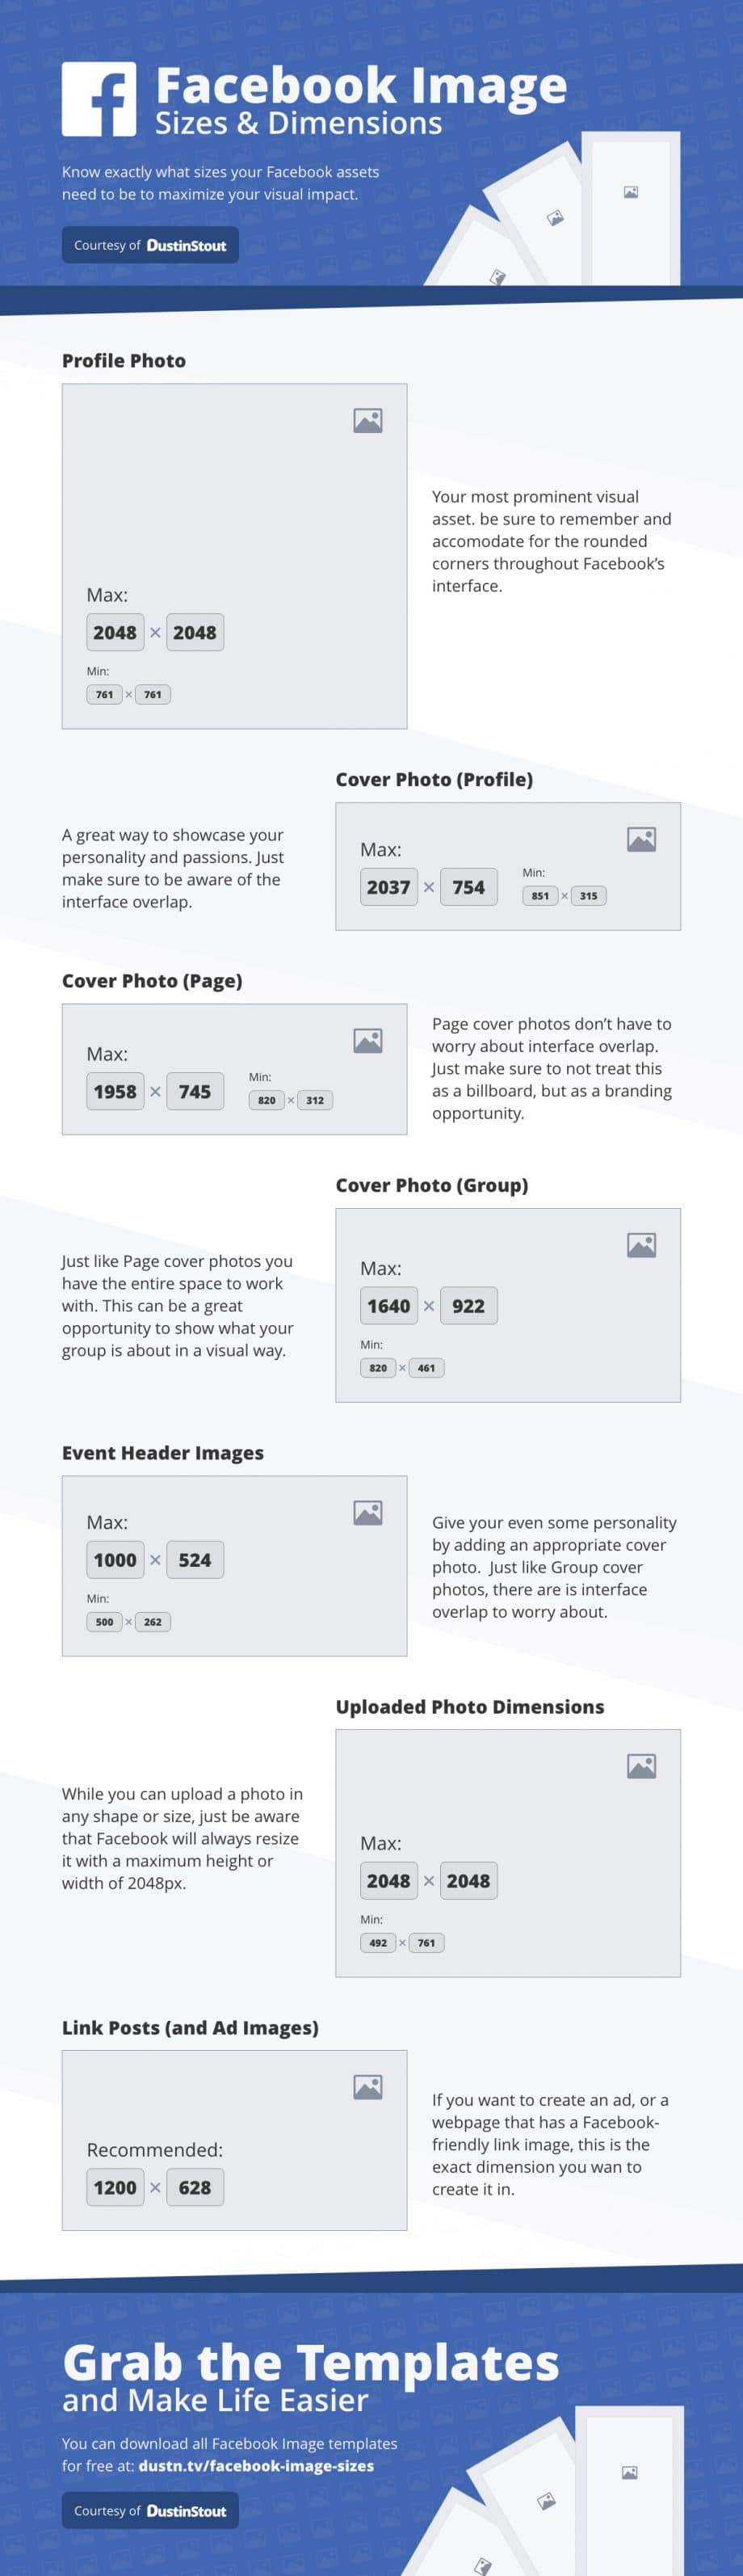 facebook image sizes infographic